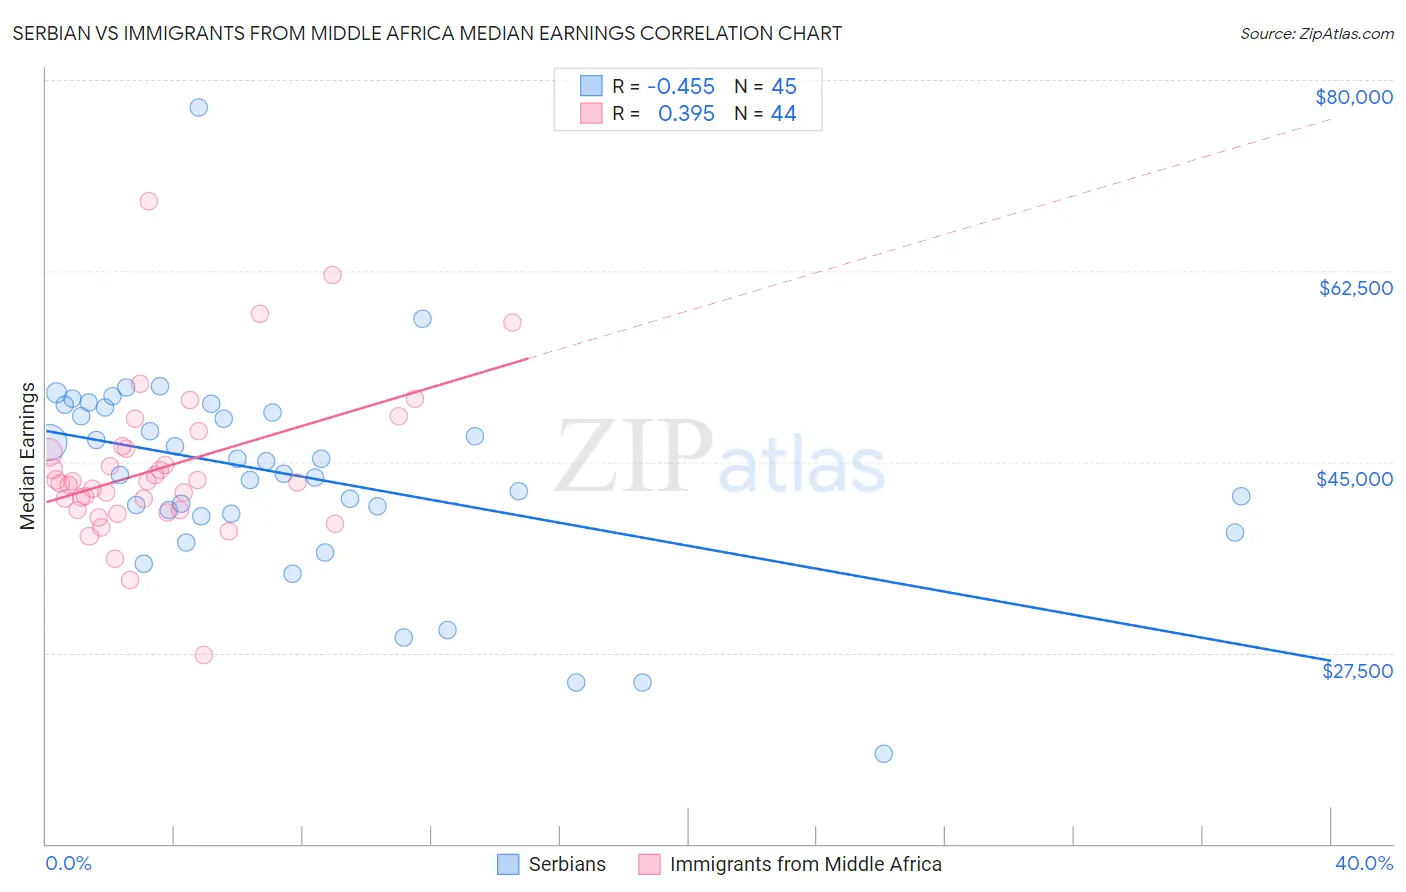 Serbian vs Immigrants from Middle Africa Median Earnings